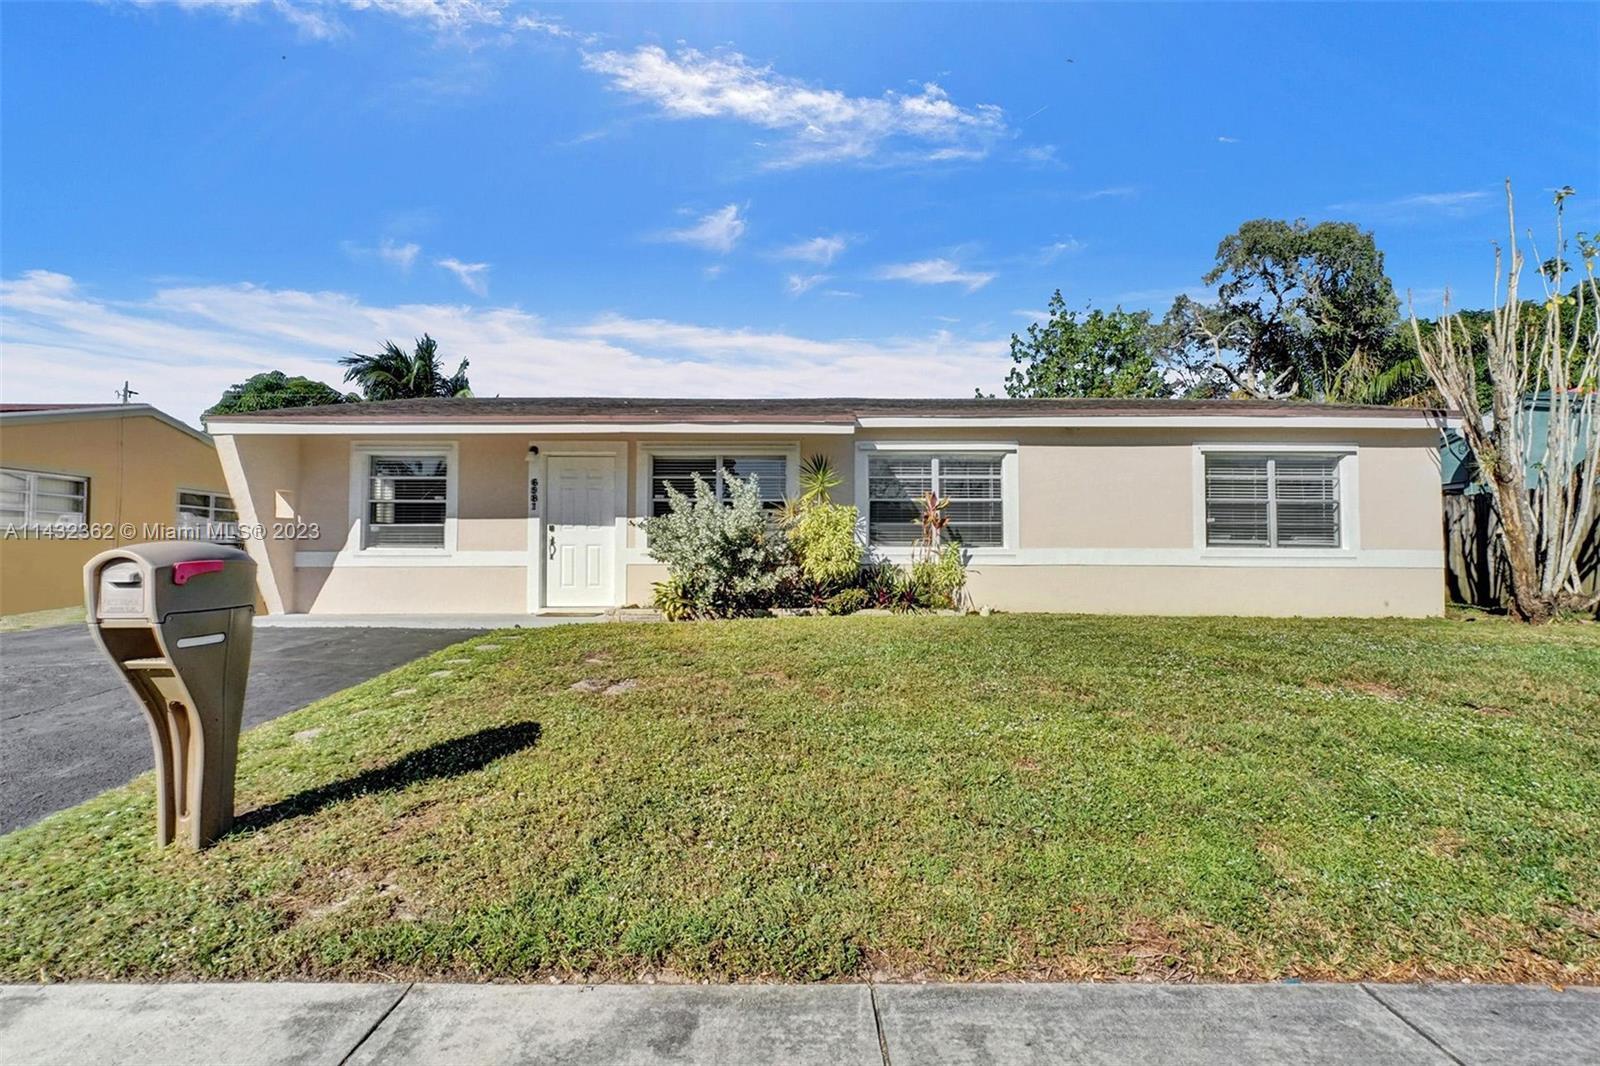 Introducing 6981 Scott St., a charming residence nestled in the heart of Hollywood, FL. This invitin